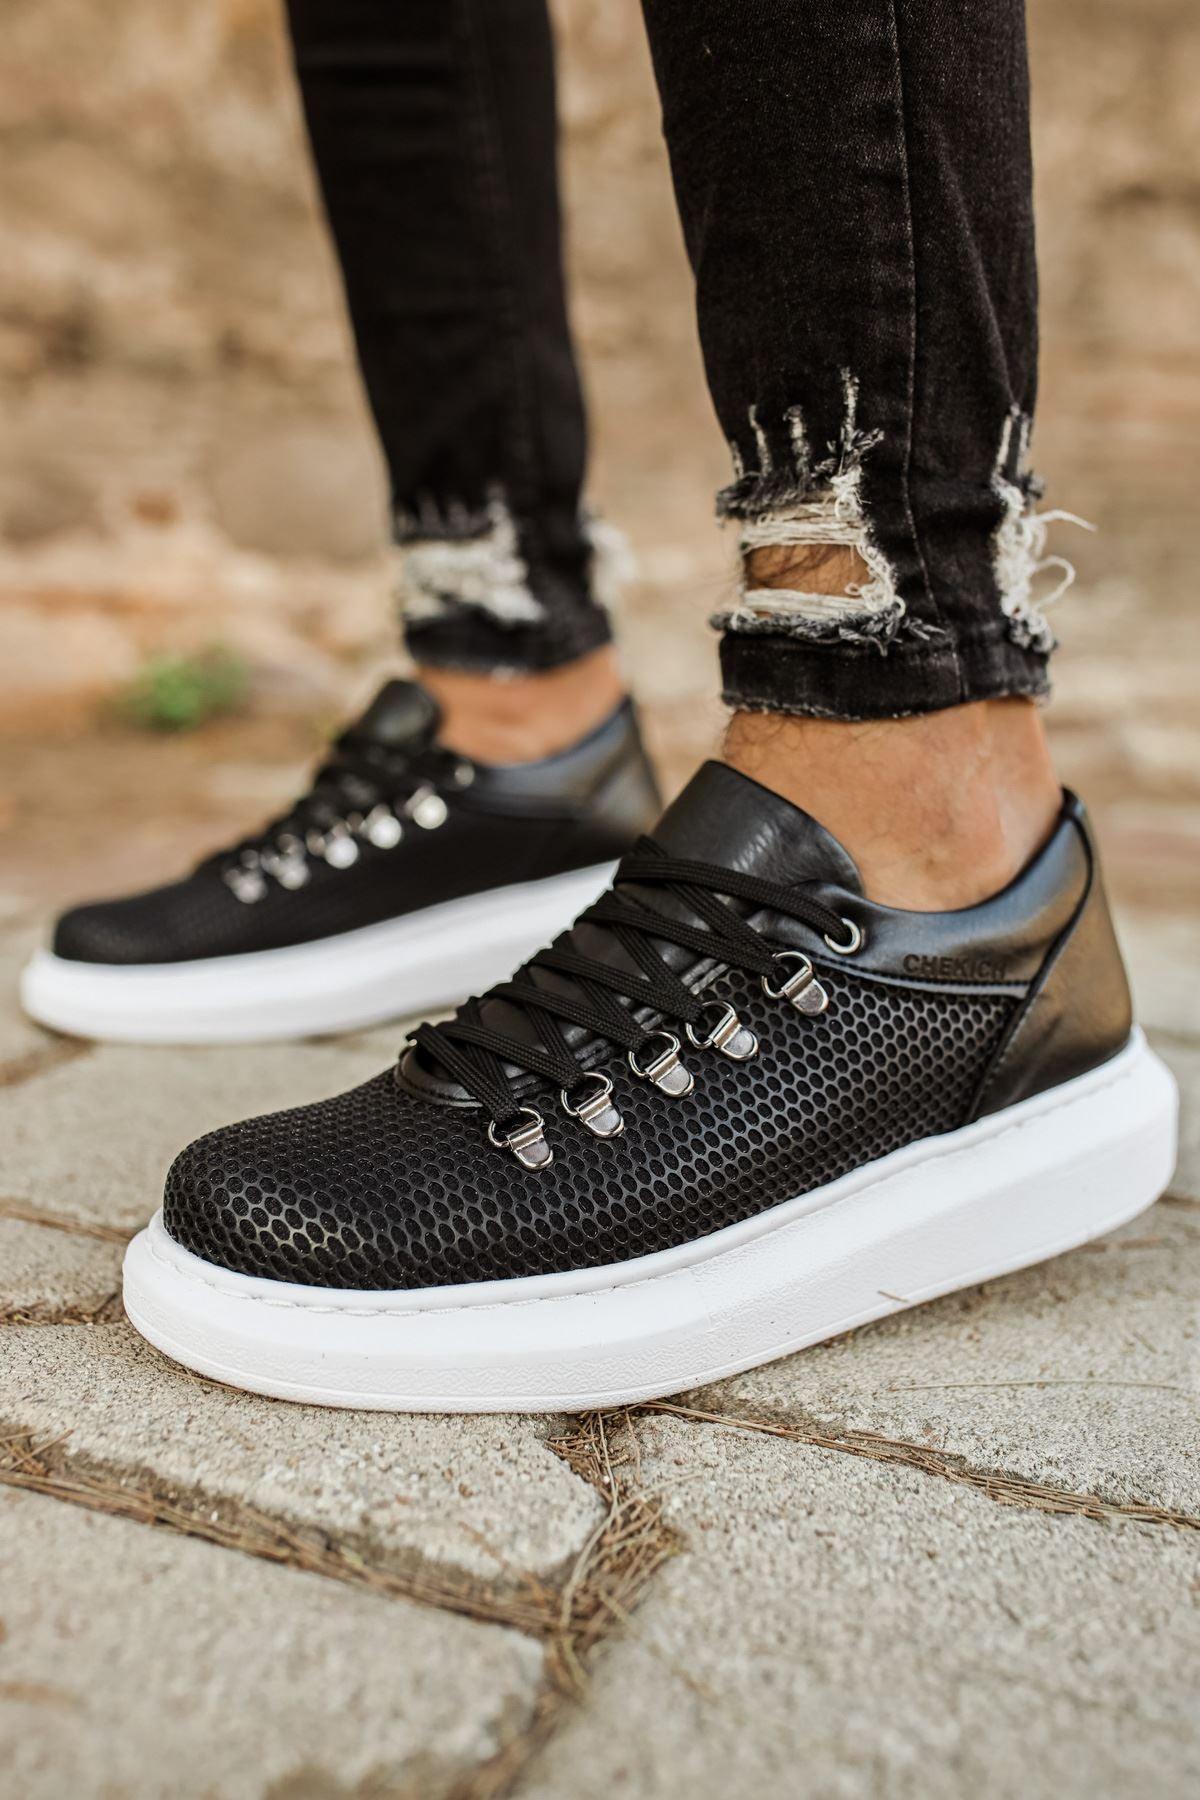 CH021 Men's Unisex Black-White Sole Honeycomb Processing Casual Sneaker Sports Shoes - STREET MODE ™